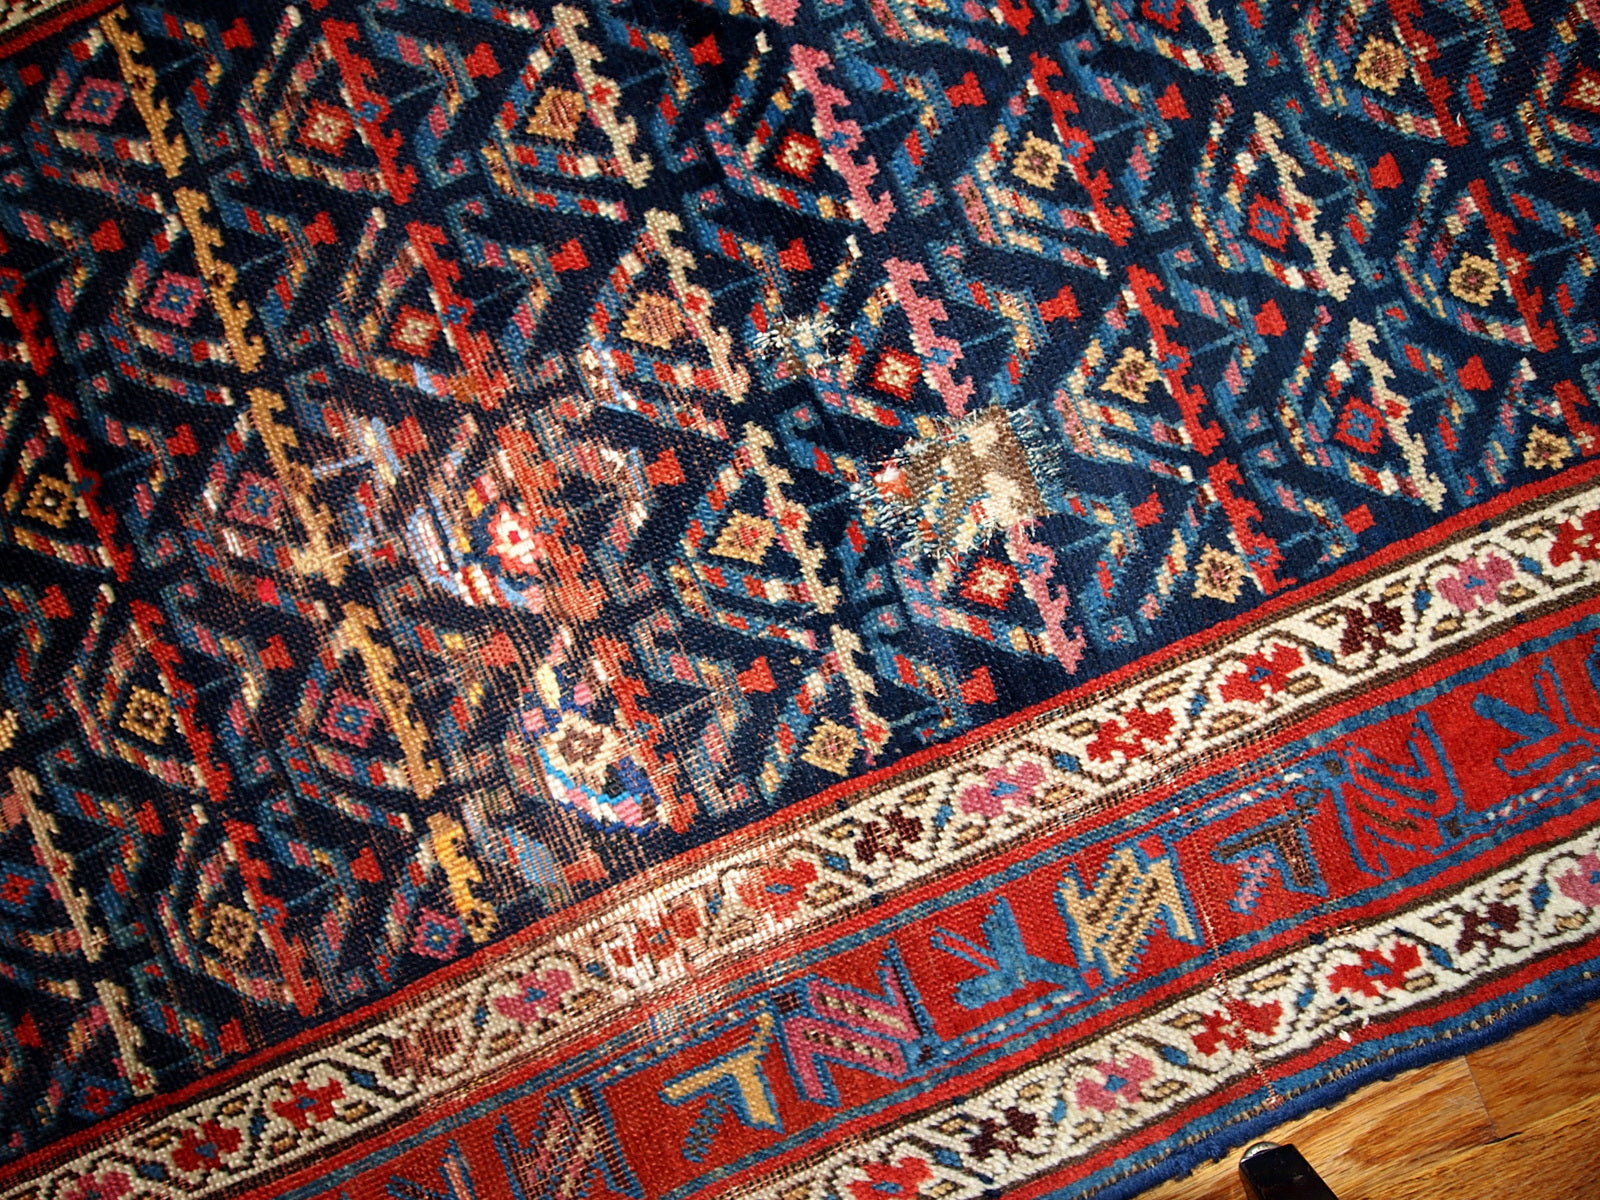 Antique hand made Persian Kurdish distressed runner in dark blue shade. The rug has some age damages and a patch.